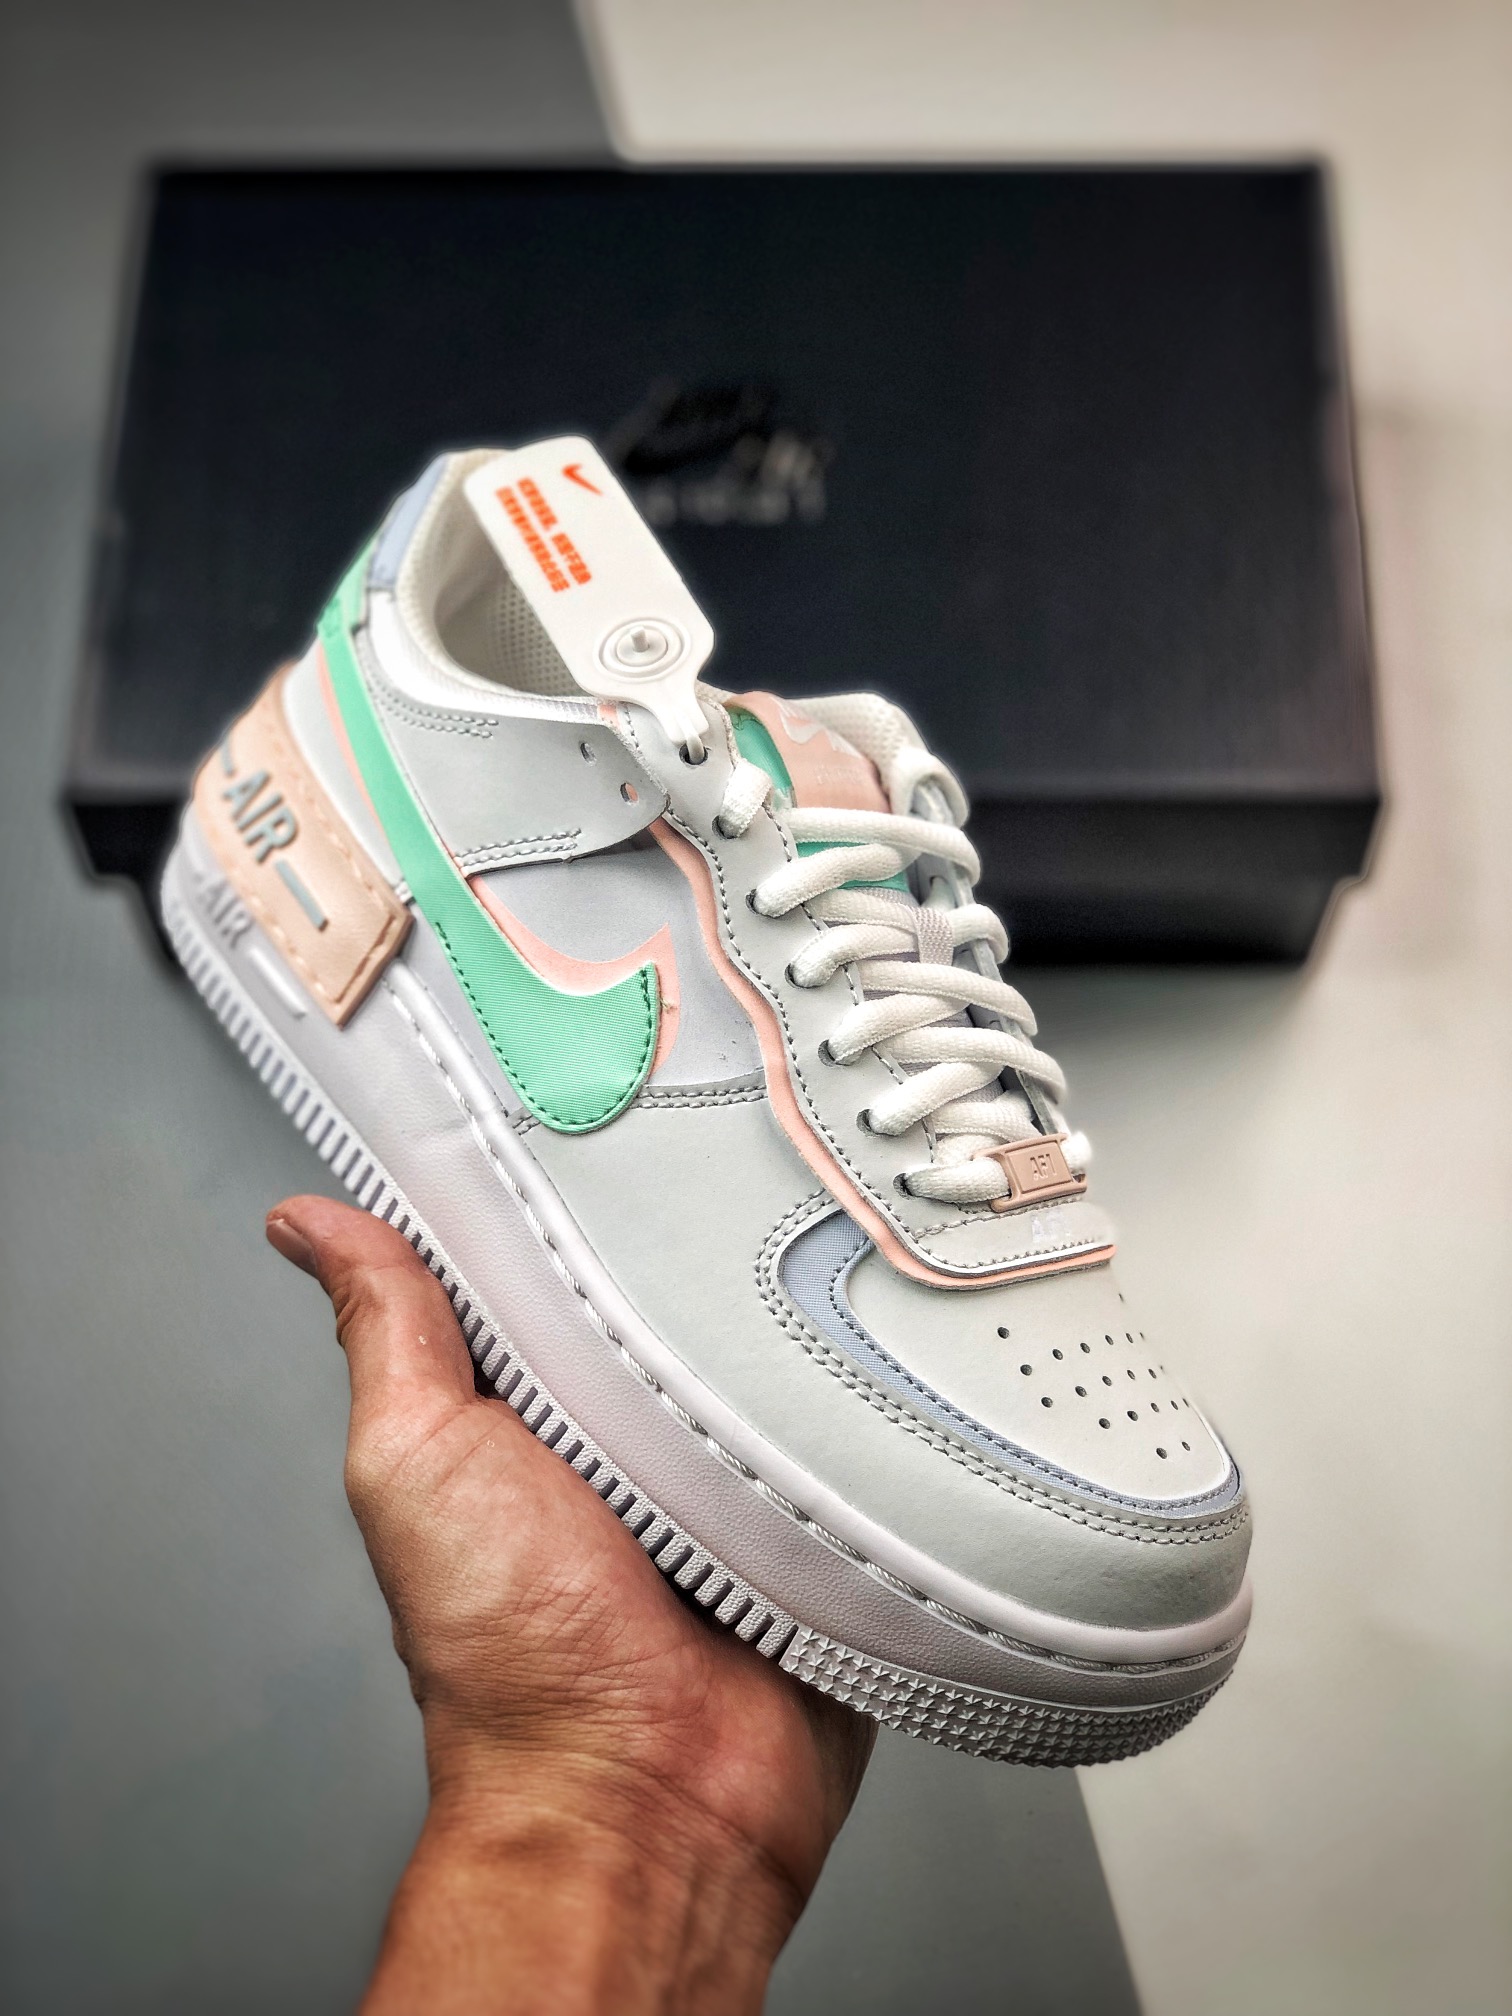 Nike Air AF Force 1 Shadow "White/Atmosphere-Mint" Shoes